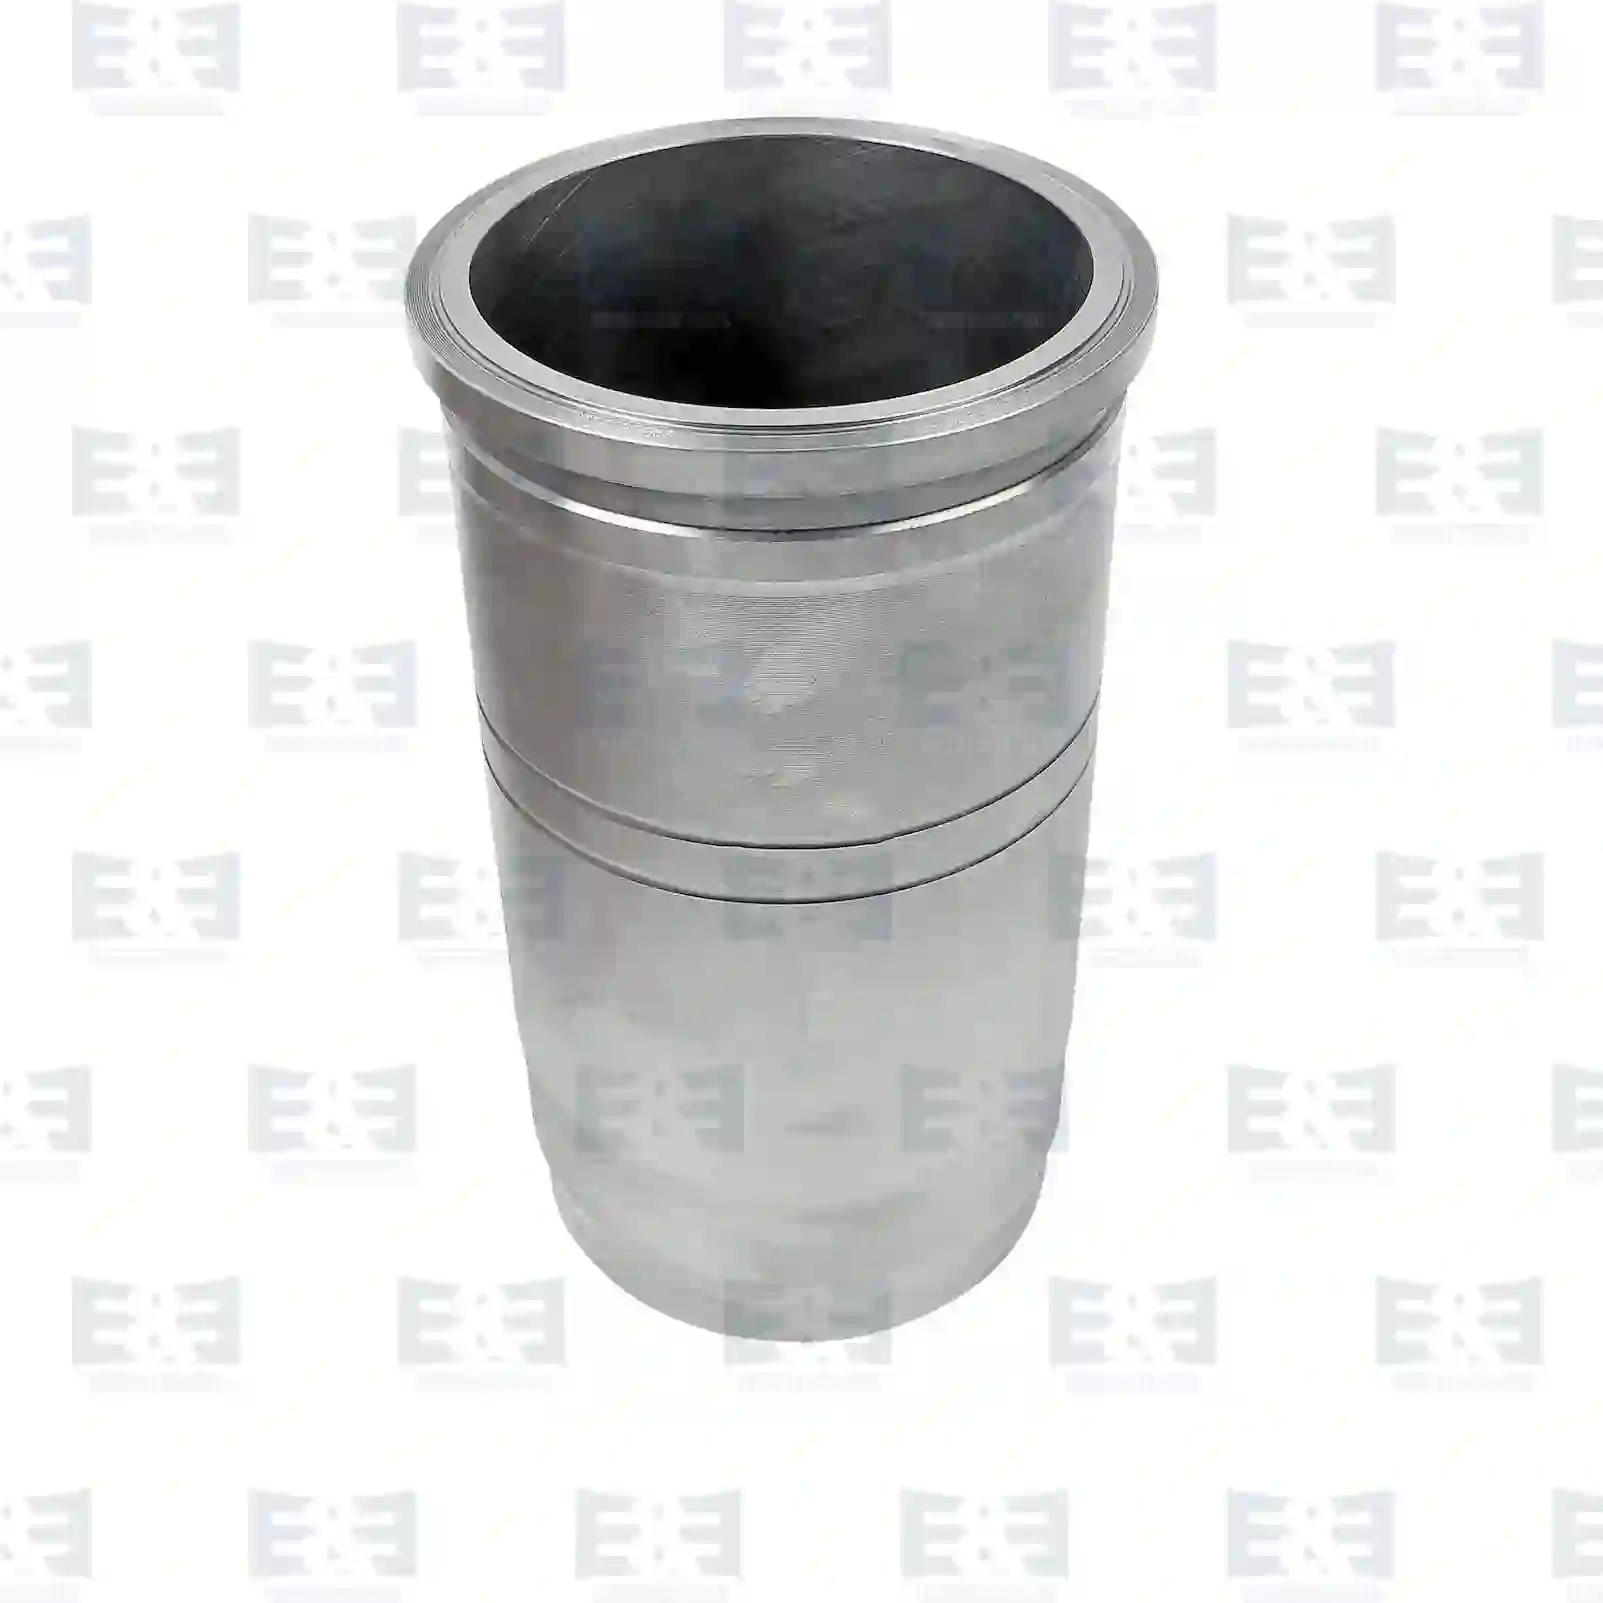 Cylinder liner, without seal rings, 2E2208066, 4570110510, 4570110610, 4600110010, 4600110210, 4600110310 ||  2E2208066 E&E Truck Spare Parts | Truck Spare Parts, Auotomotive Spare Parts Cylinder liner, without seal rings, 2E2208066, 4570110510, 4570110610, 4600110010, 4600110210, 4600110310 ||  2E2208066 E&E Truck Spare Parts | Truck Spare Parts, Auotomotive Spare Parts